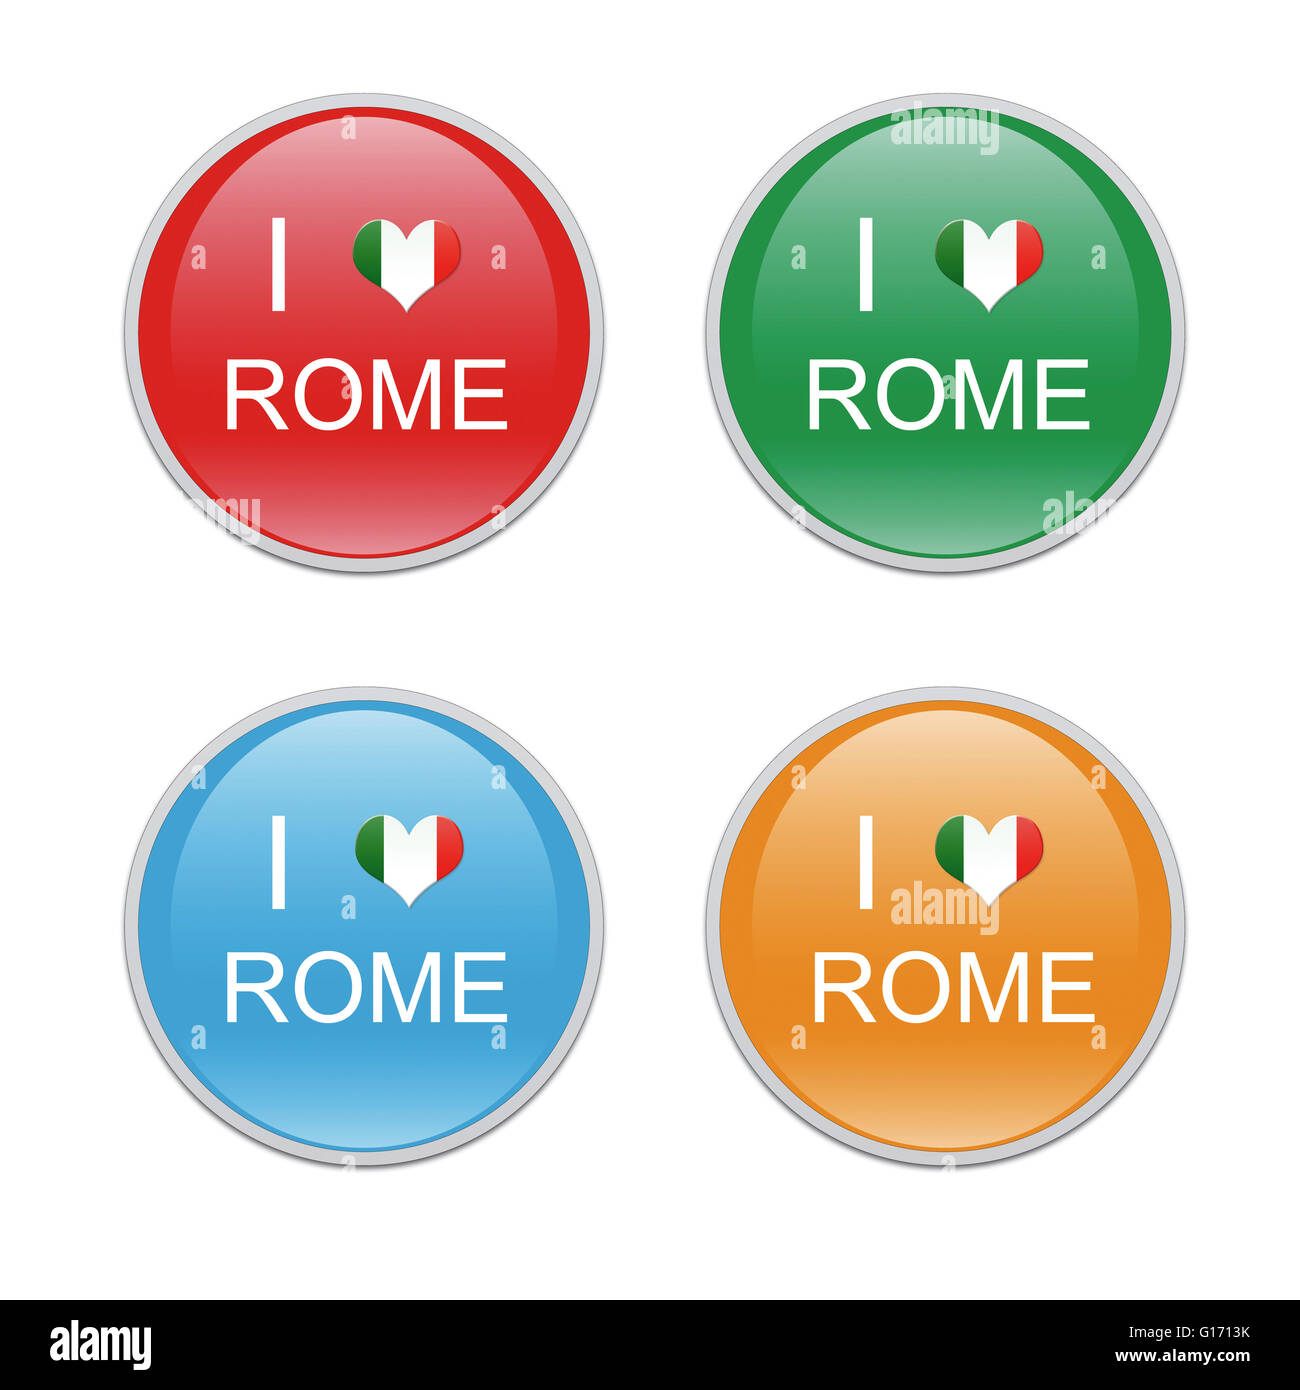 Icons to symbolize I Love Rome in red, green, blue and orange colors Stock Photo